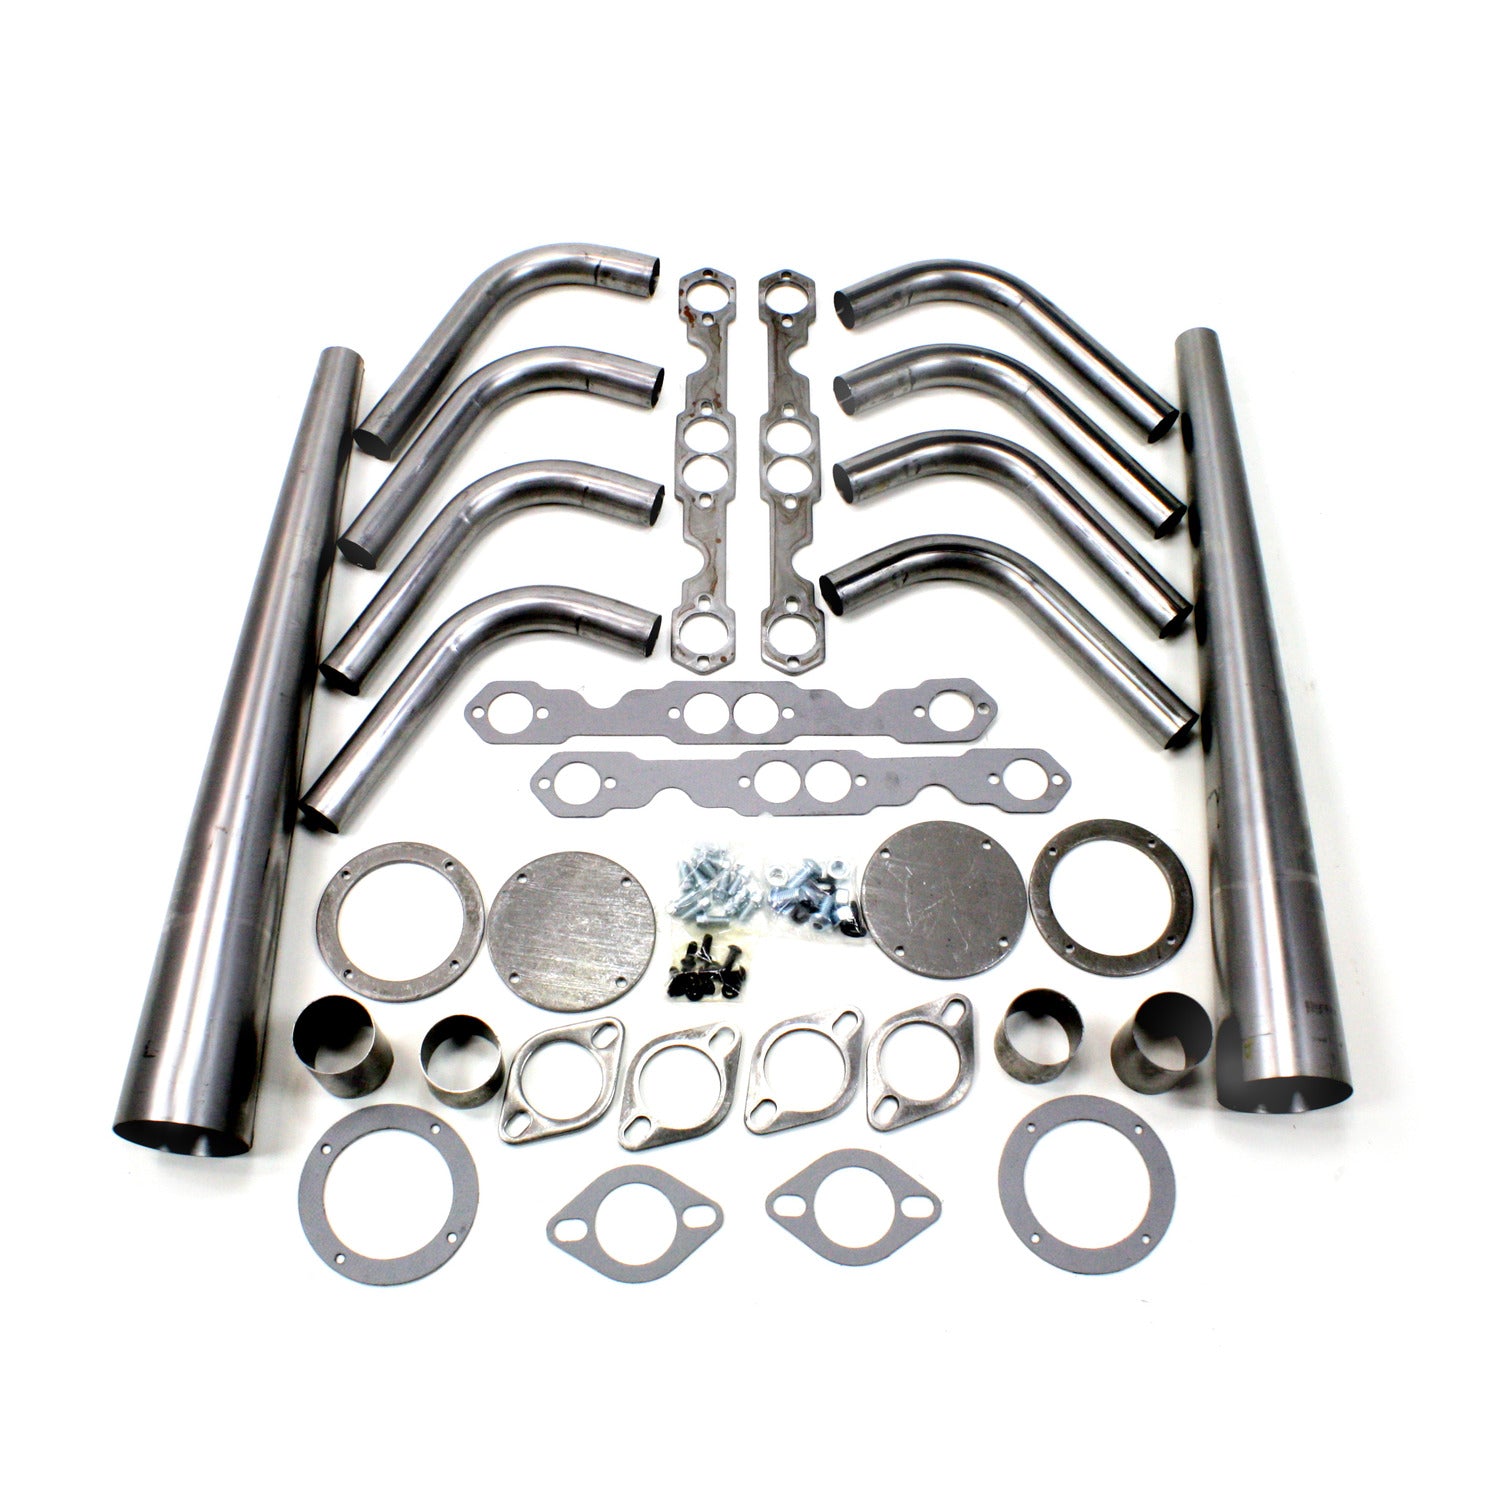 Patriot Exhaust H8002 1 5/8"x4" Header Lakester Weld-up Kit Small Block Chevy